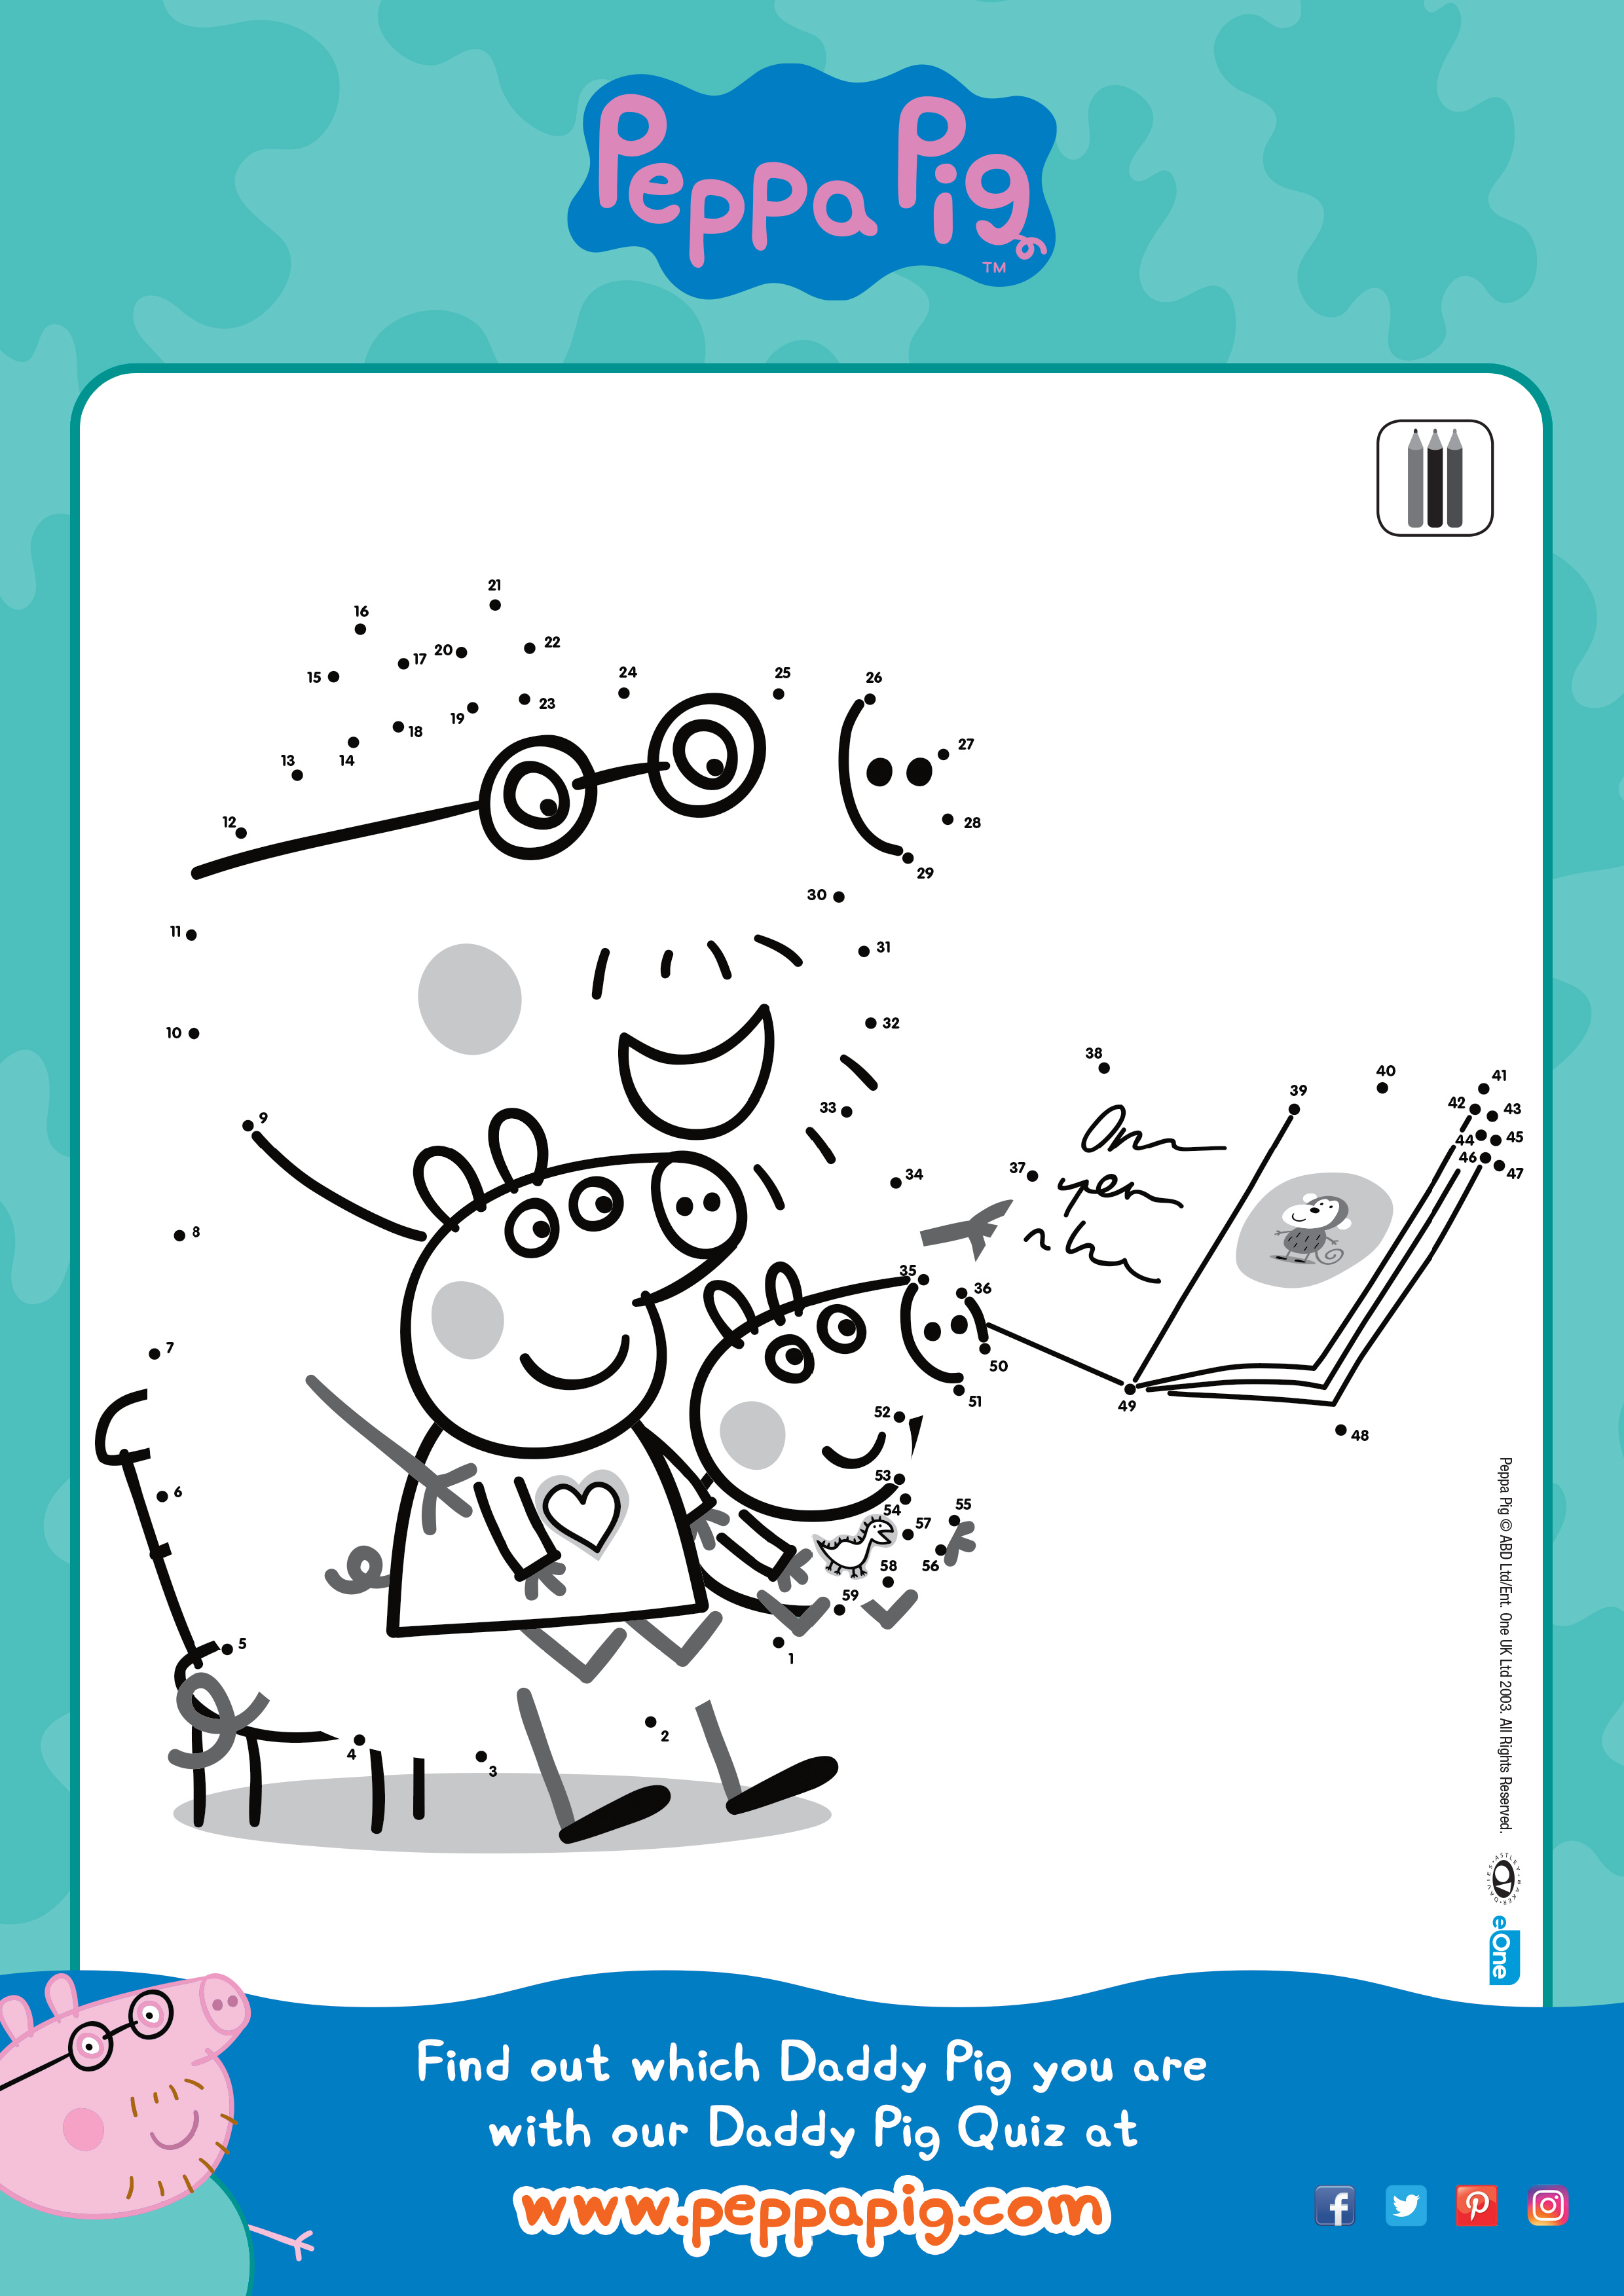 Download fun activities and color-ins to print out and play with Peppa